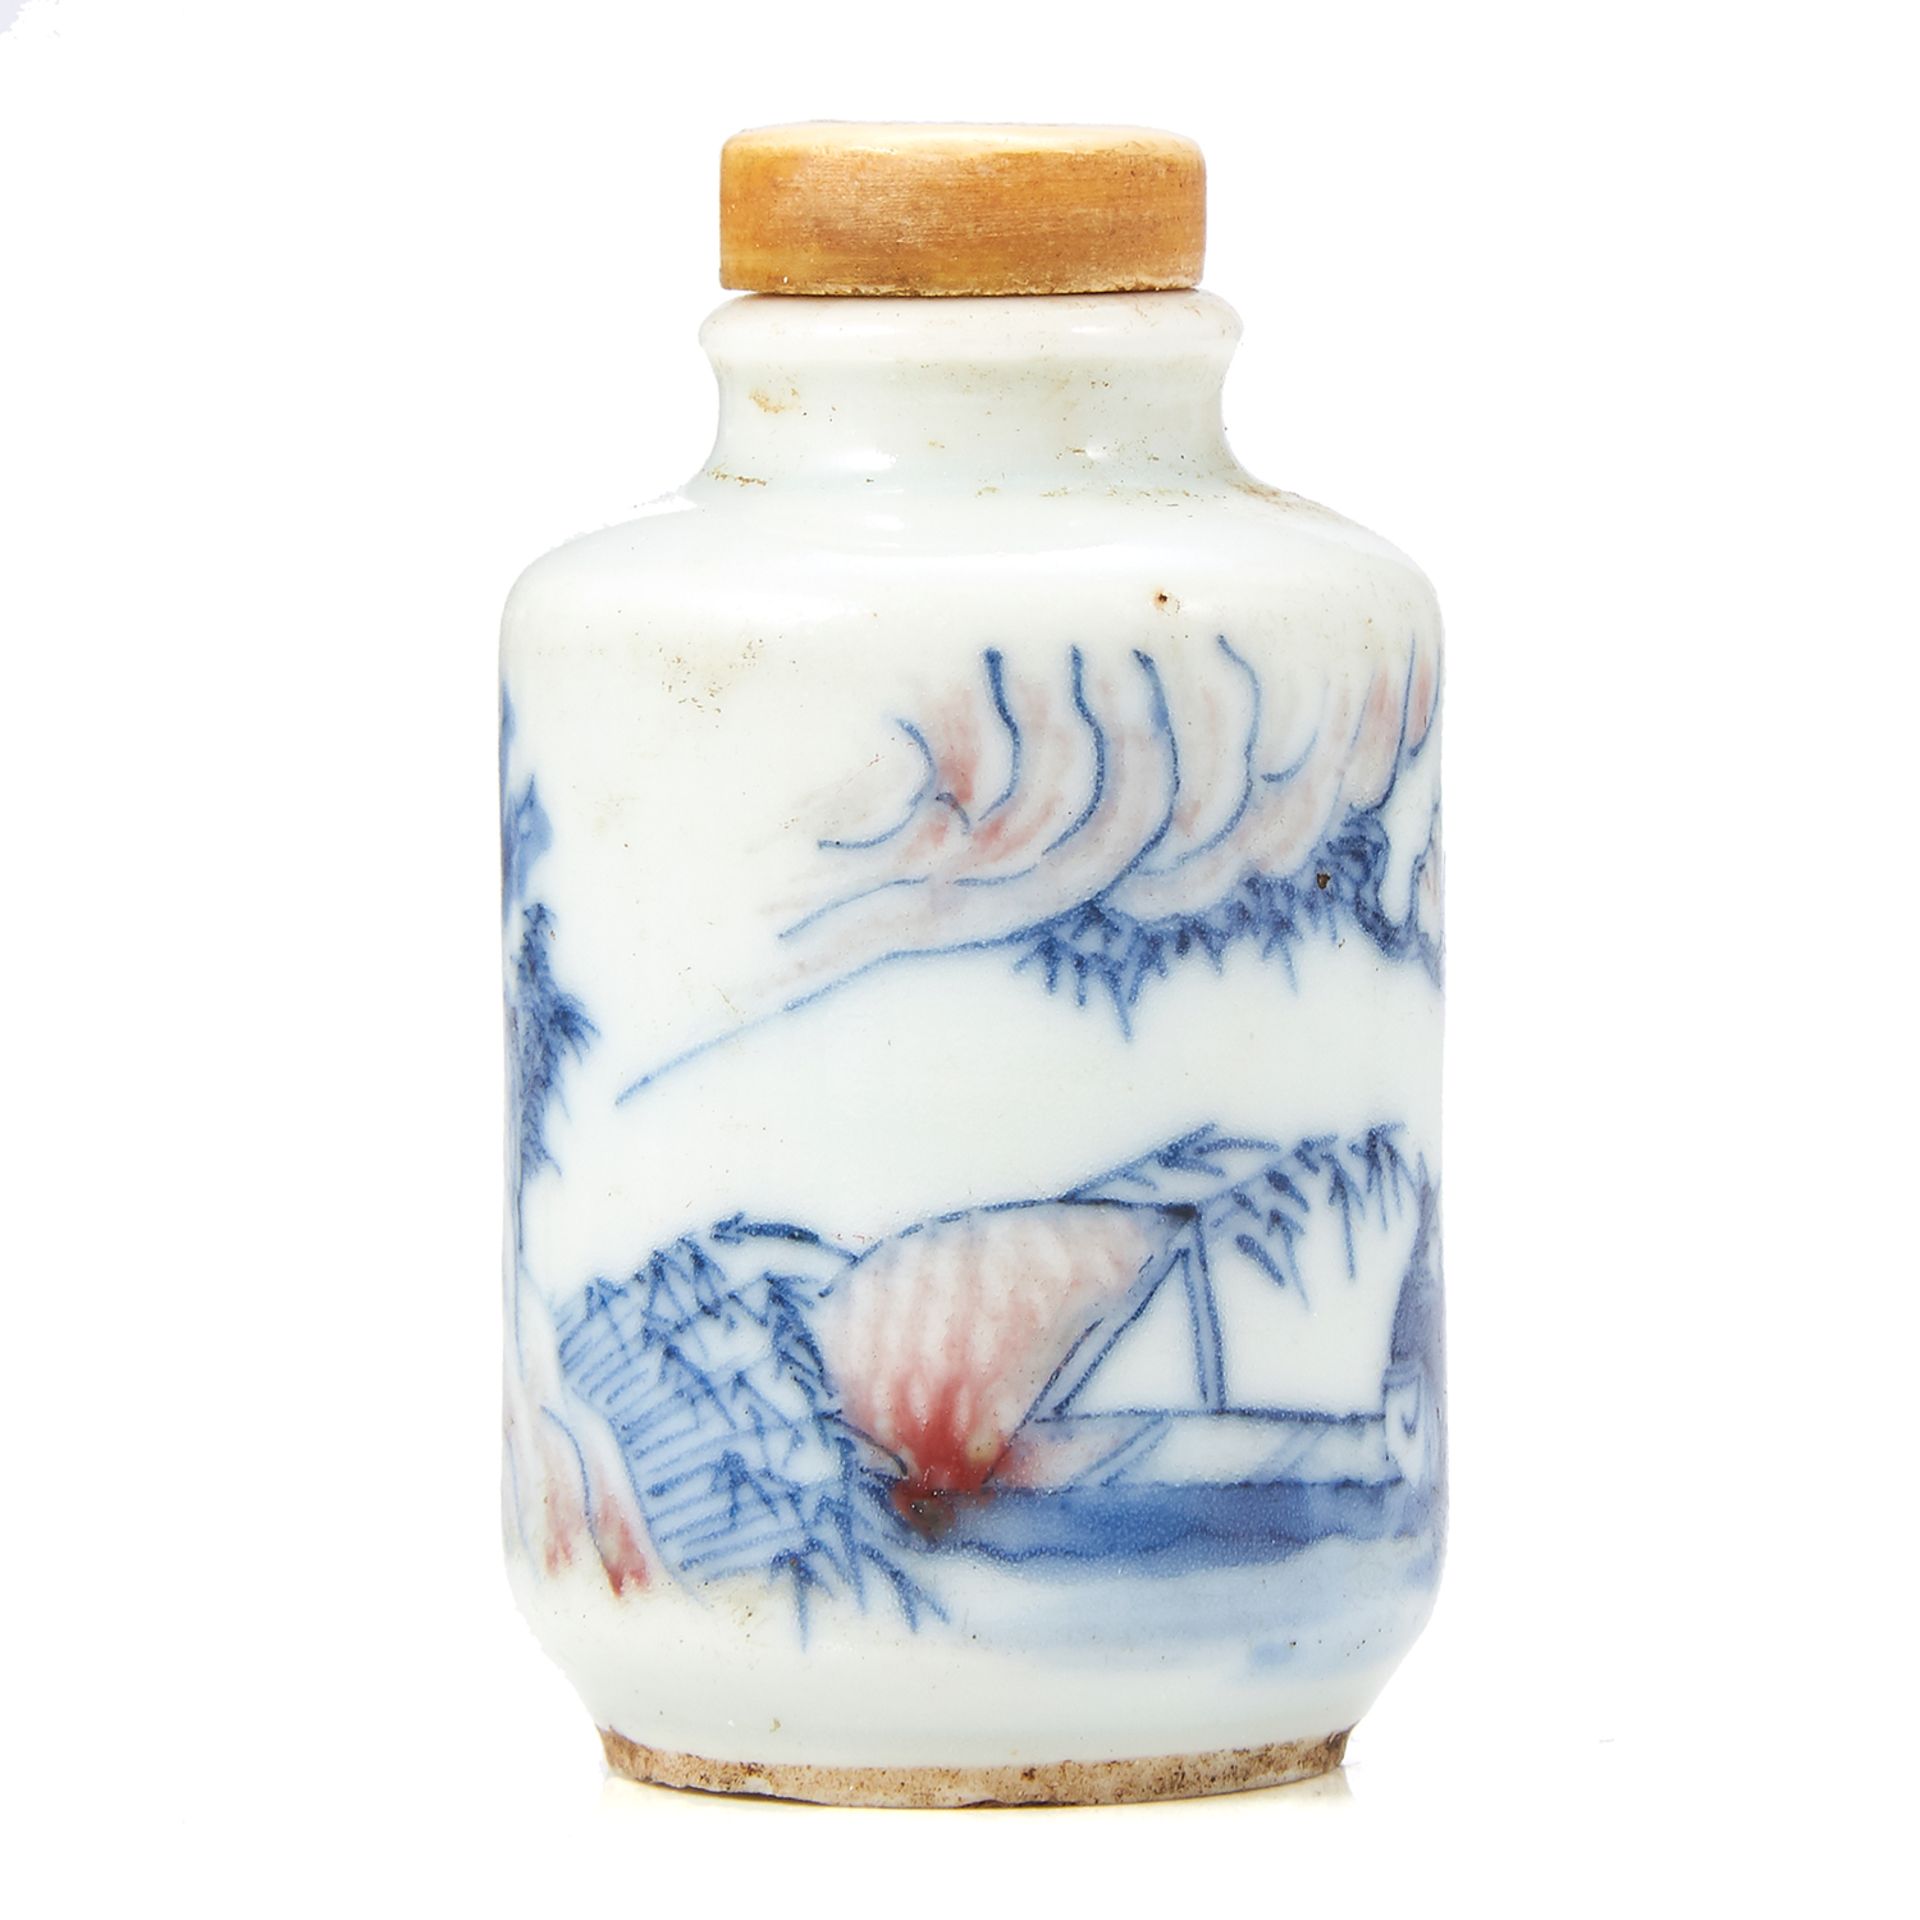 AN ANTIQUE CHINESE BLUE AND WHITE SNUFF BOTTLE, 19TH CENTURY painted with traditional scenes, 4.